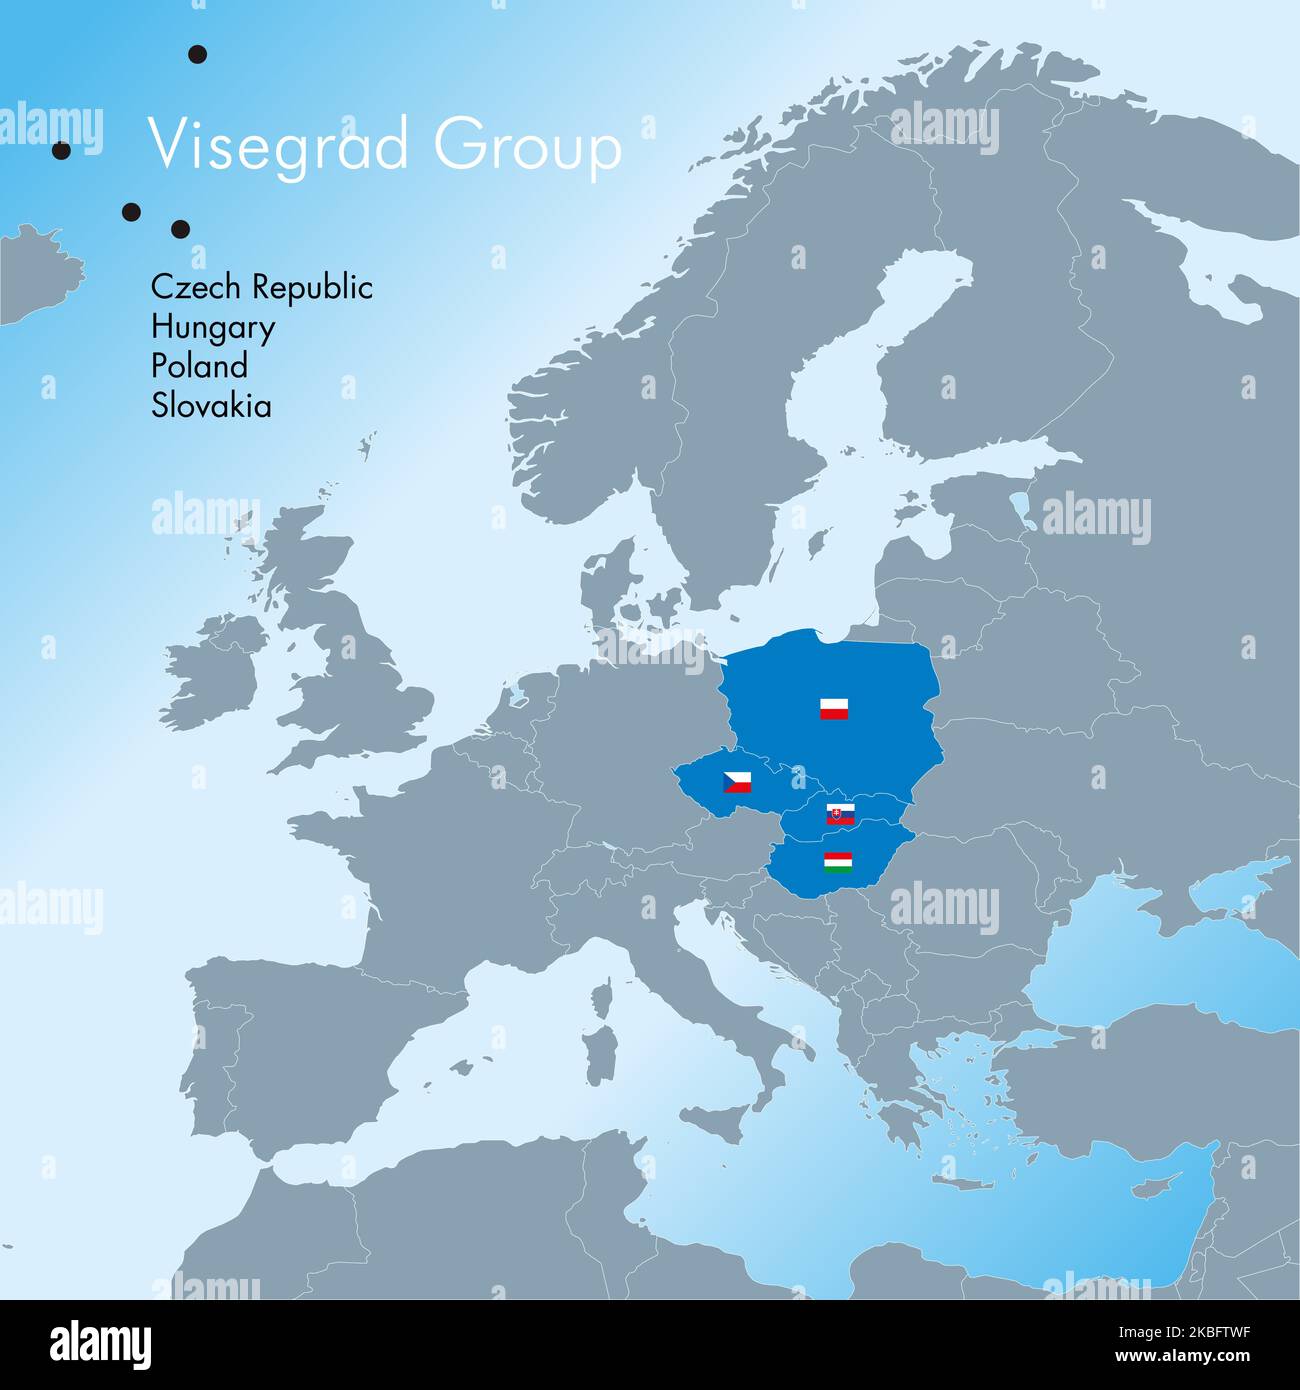 Visegrd Group agreement map and flags, Europe, vector file, illustration Stock Vector